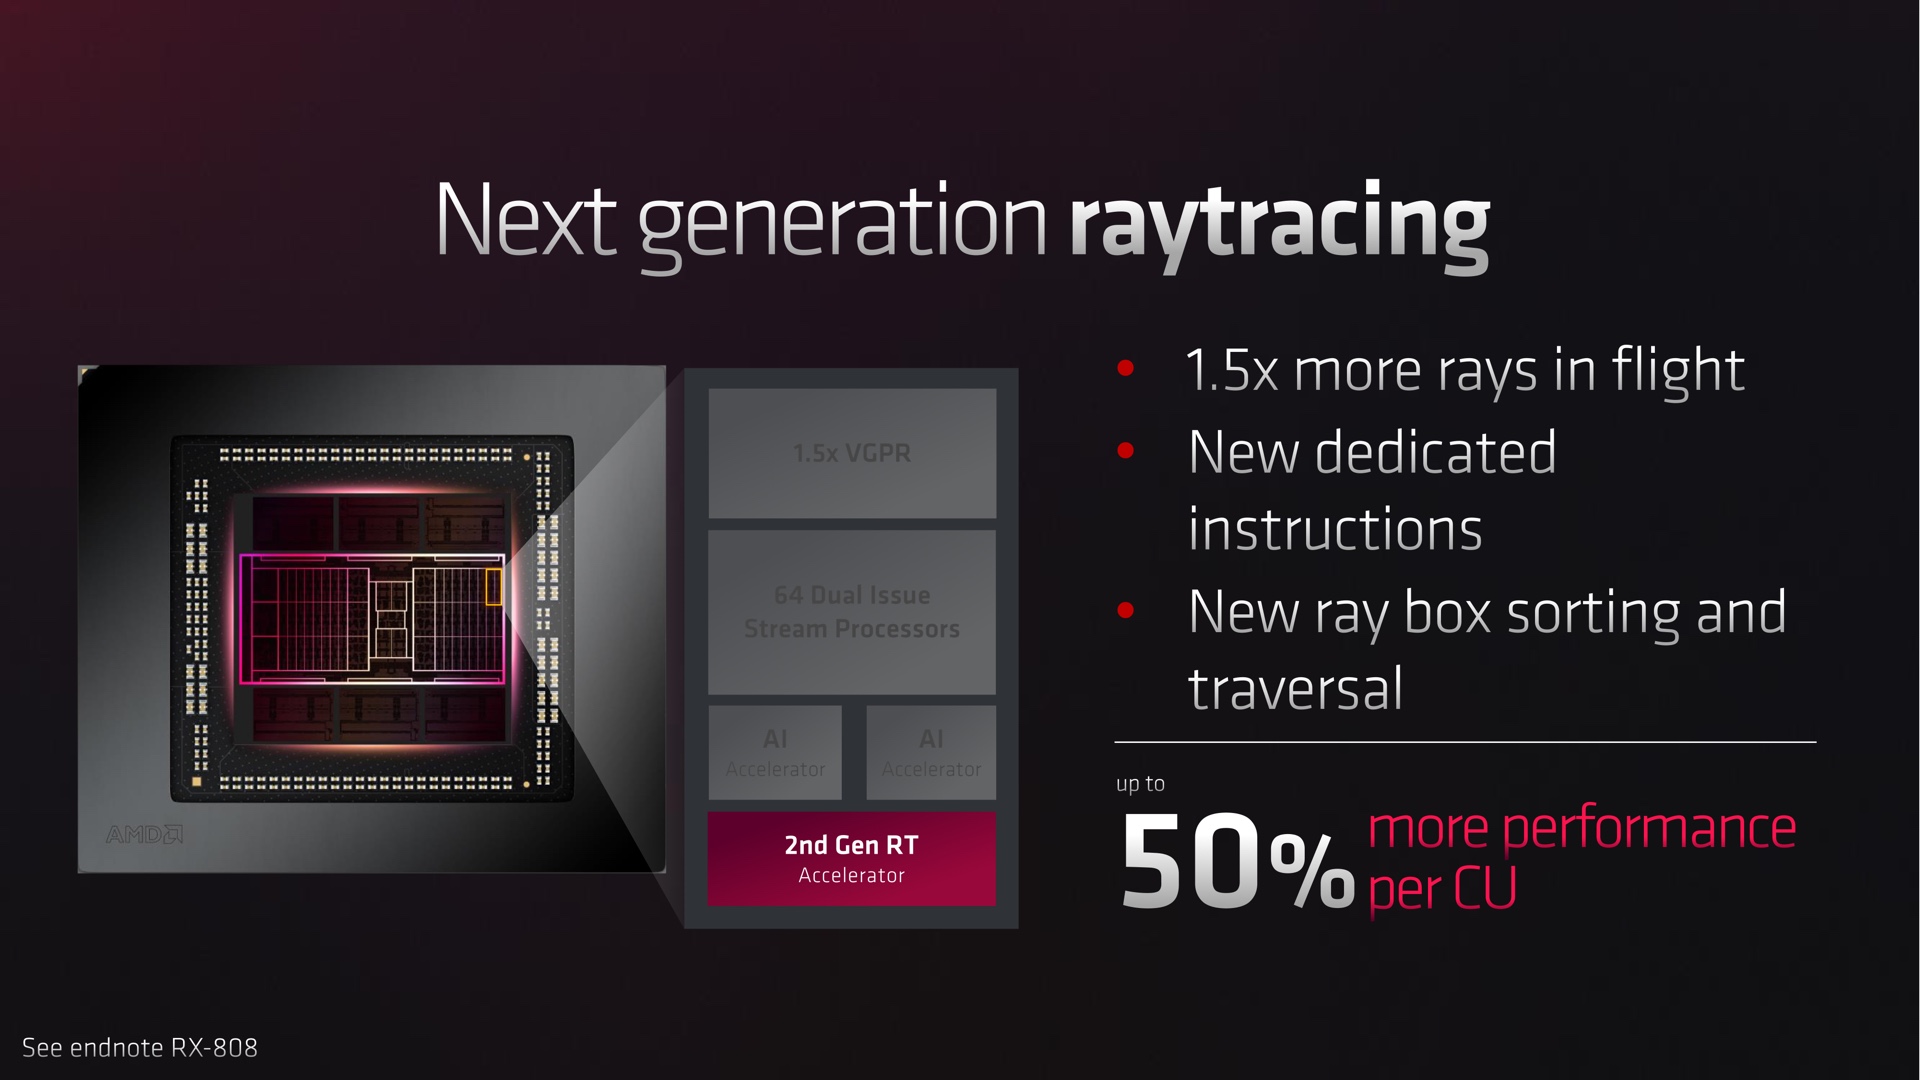 AMD Radeon RX 7900 XTX announced with 24 GB VRAM, 355 W TGP and a  relatively affordable price tag -  News